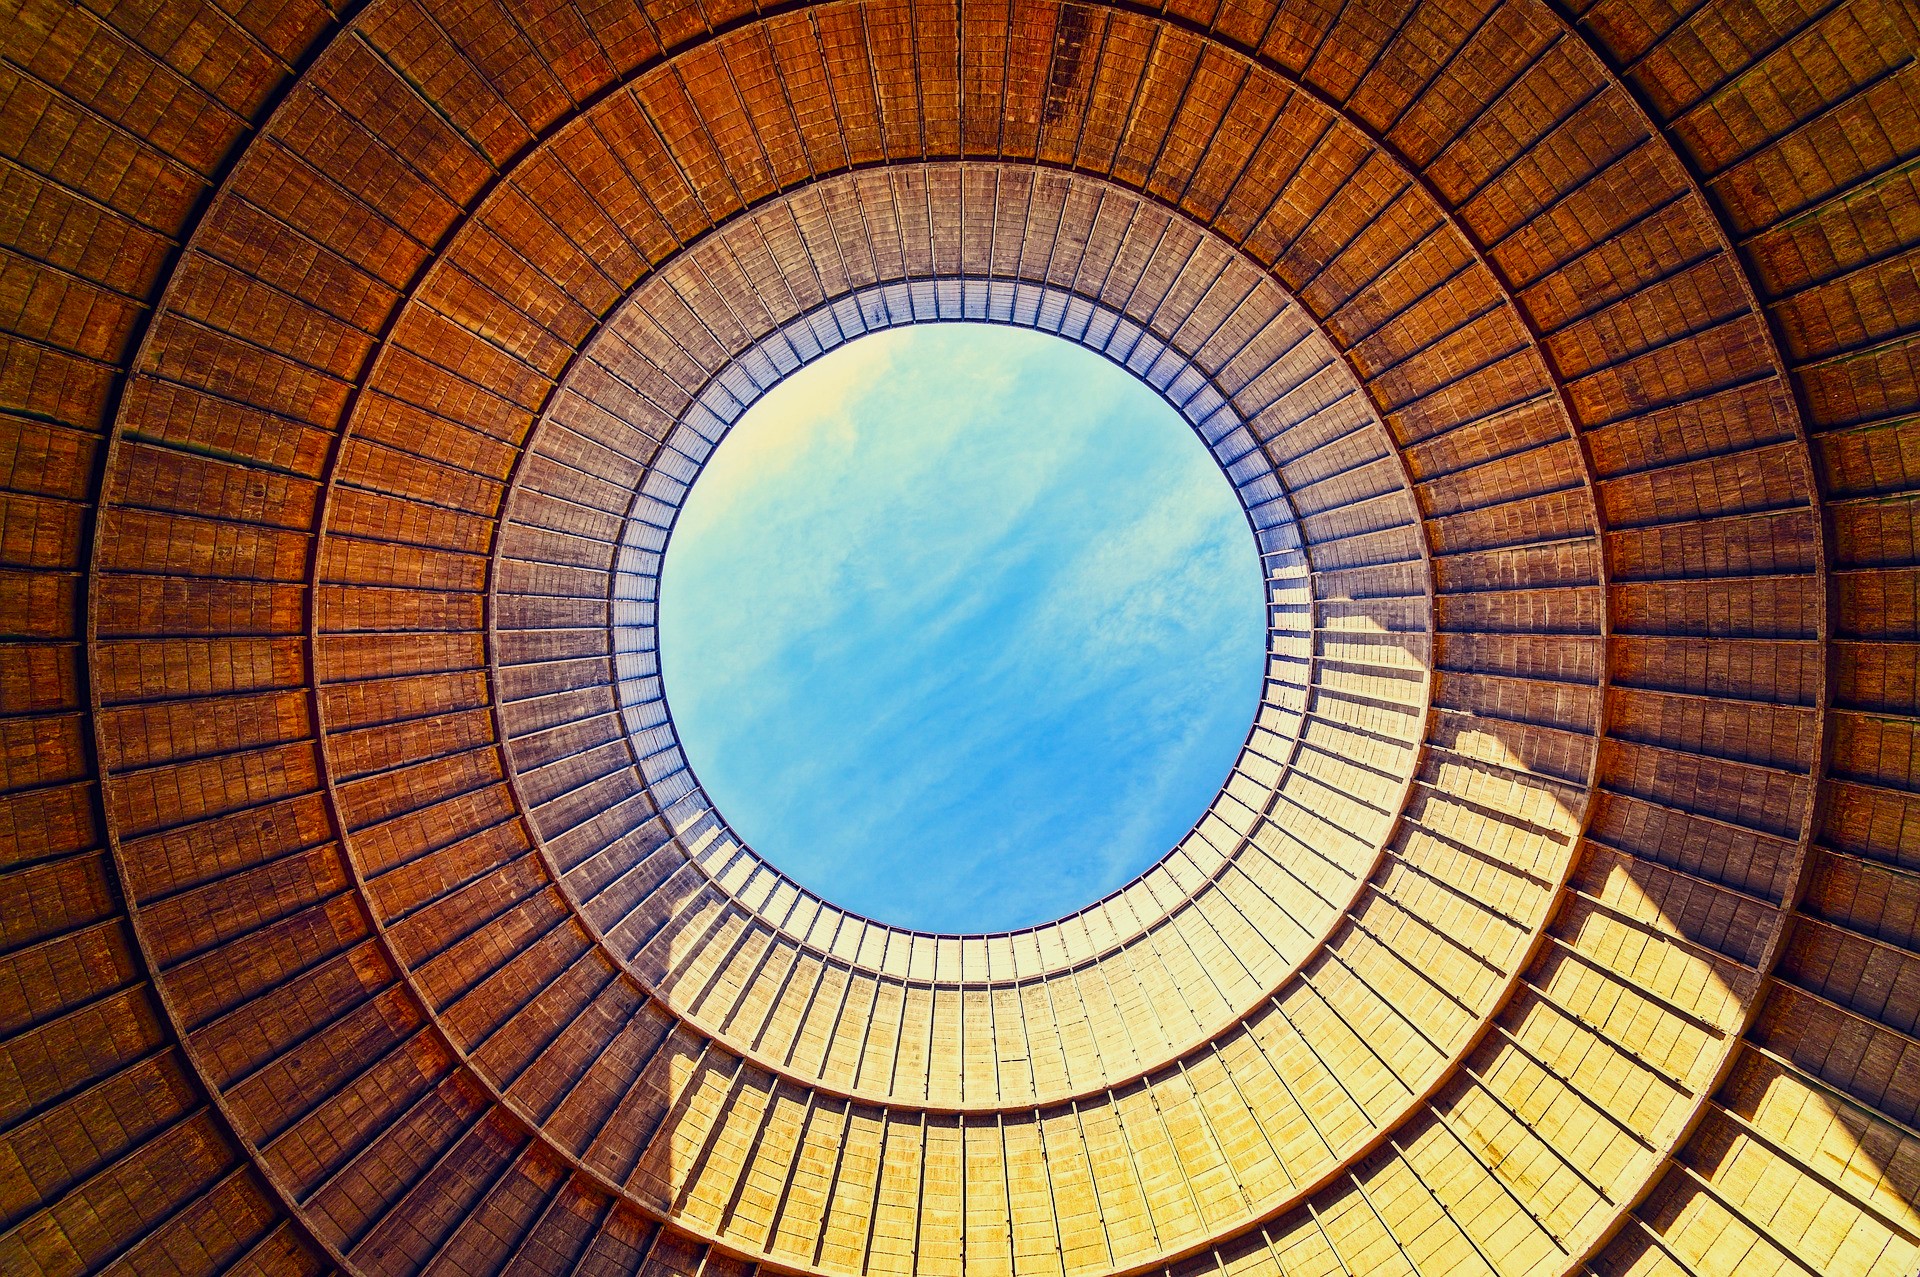 View looking up at the sky from the inside of a cooling tower